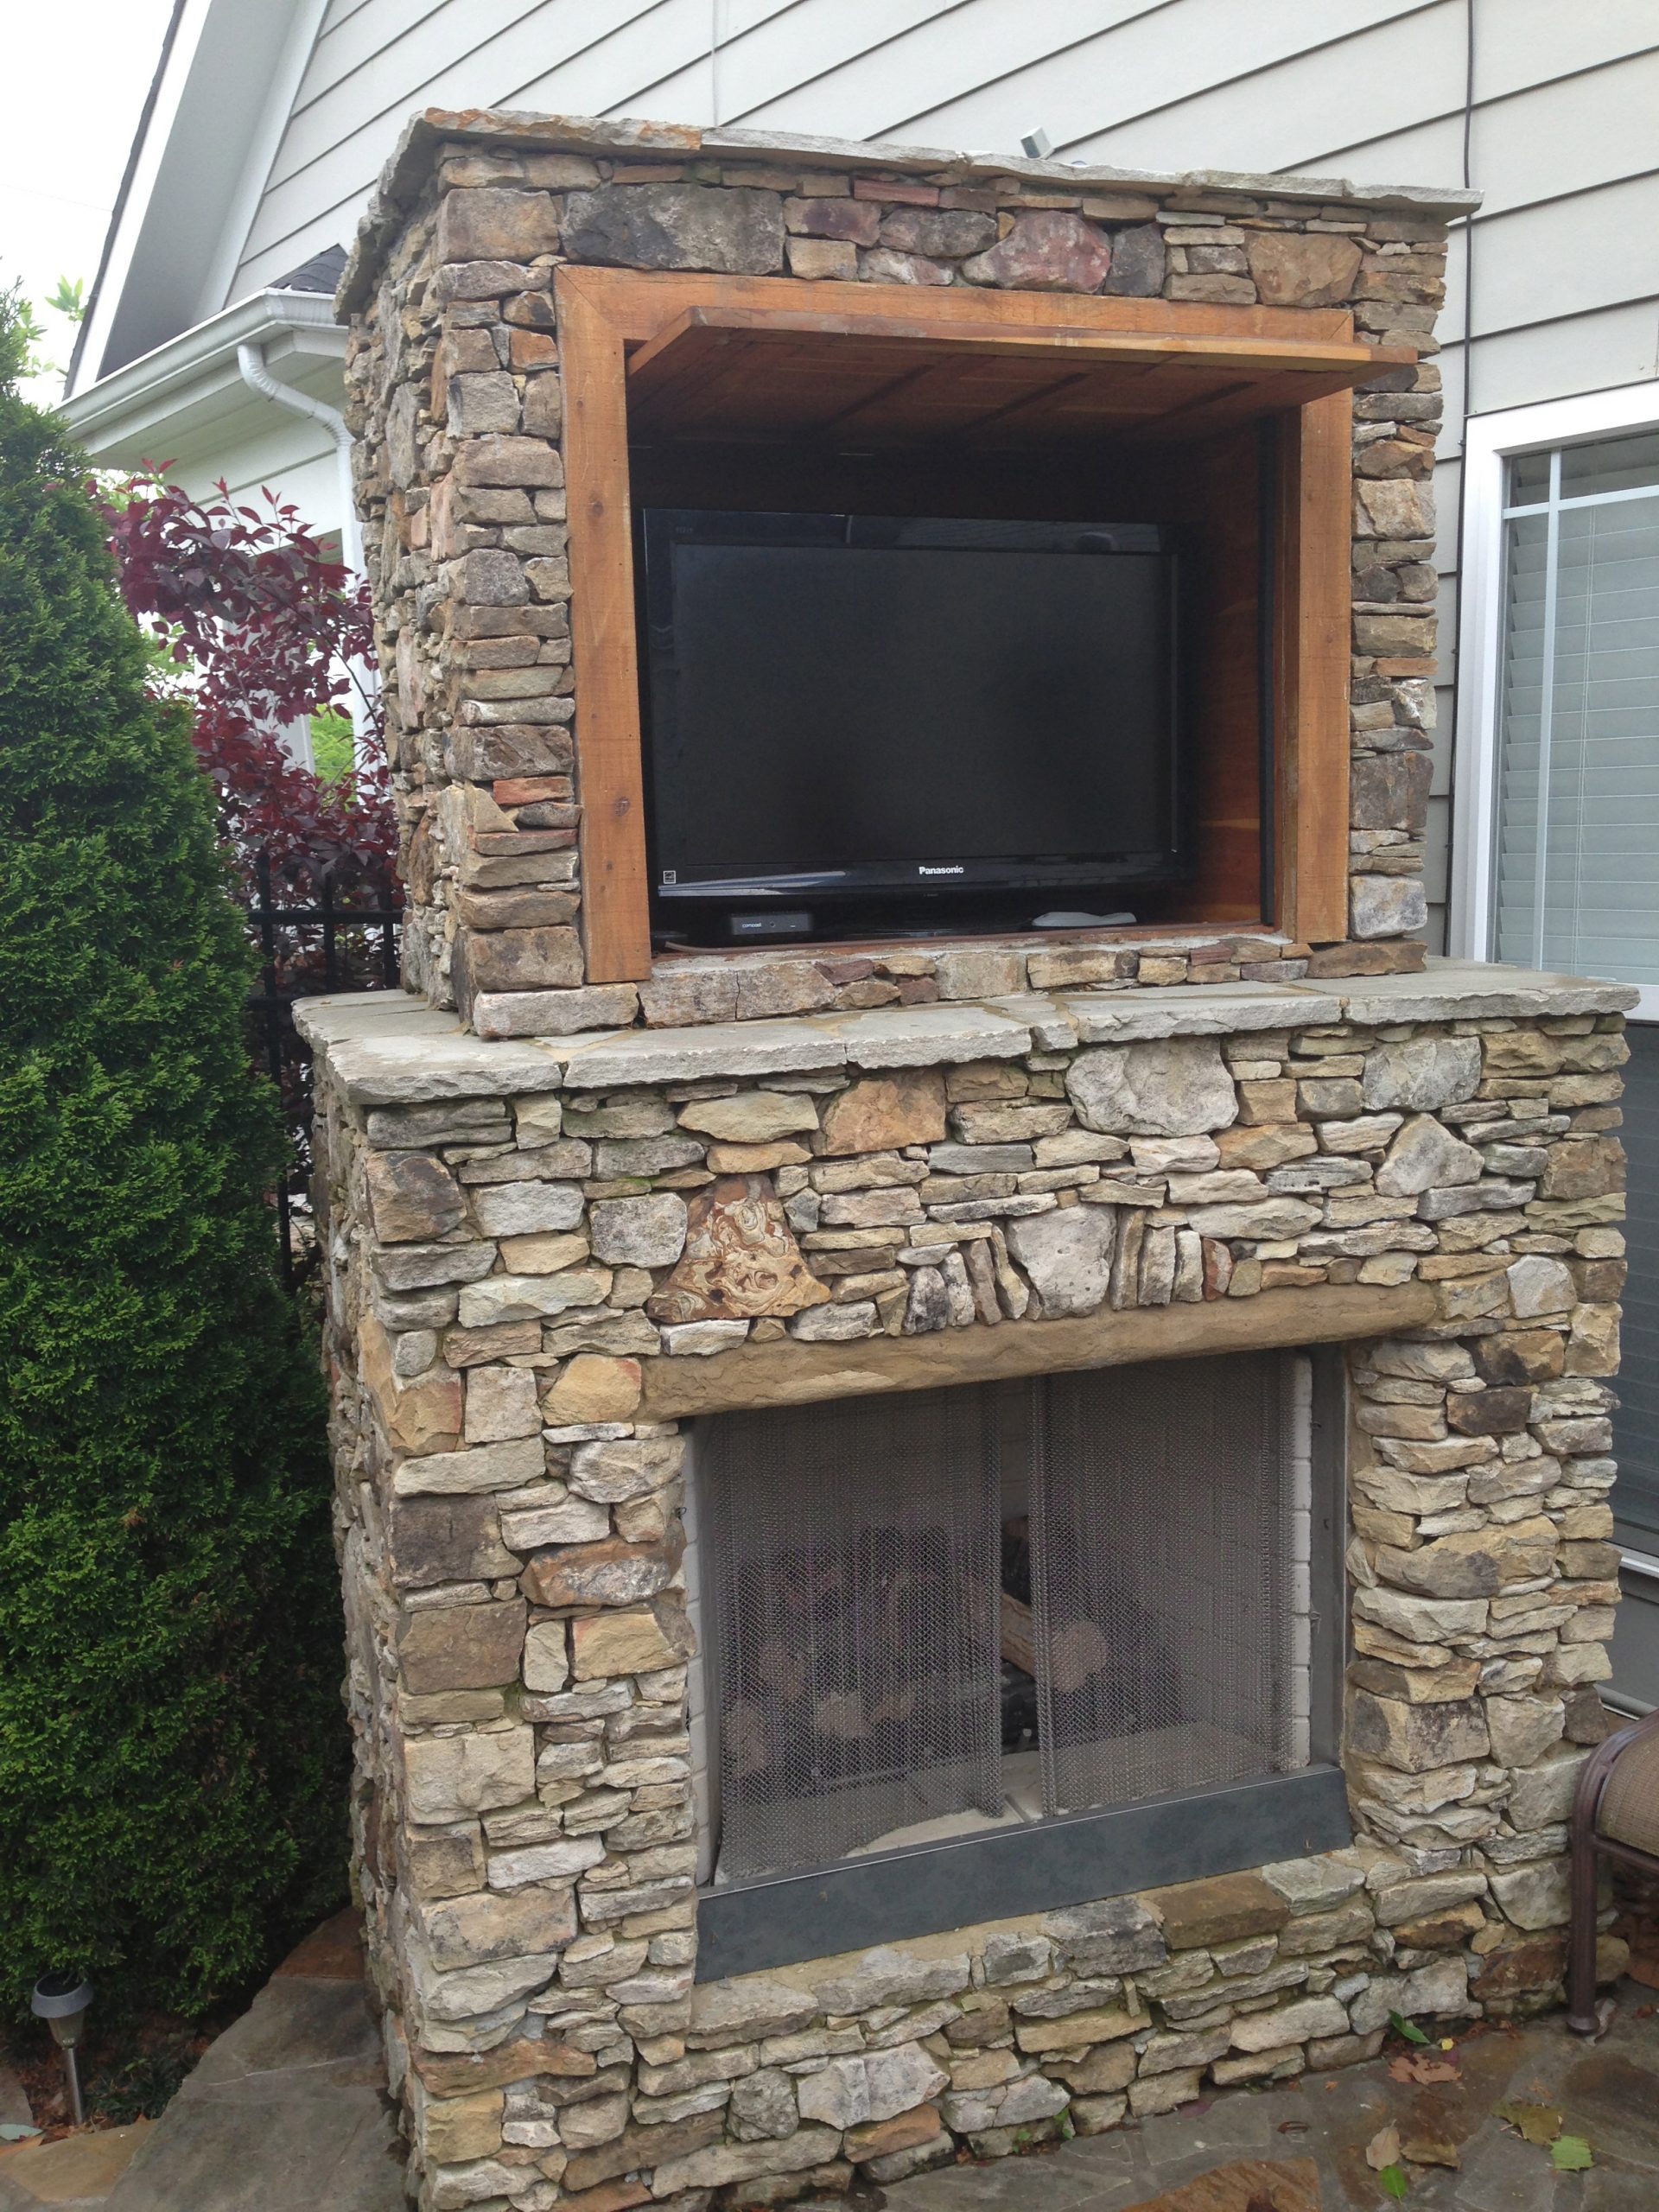 Electric Outdoor Fireplace Lovely Fireplace Tv Patio Backyard Designs Fireplaces Eden Farms